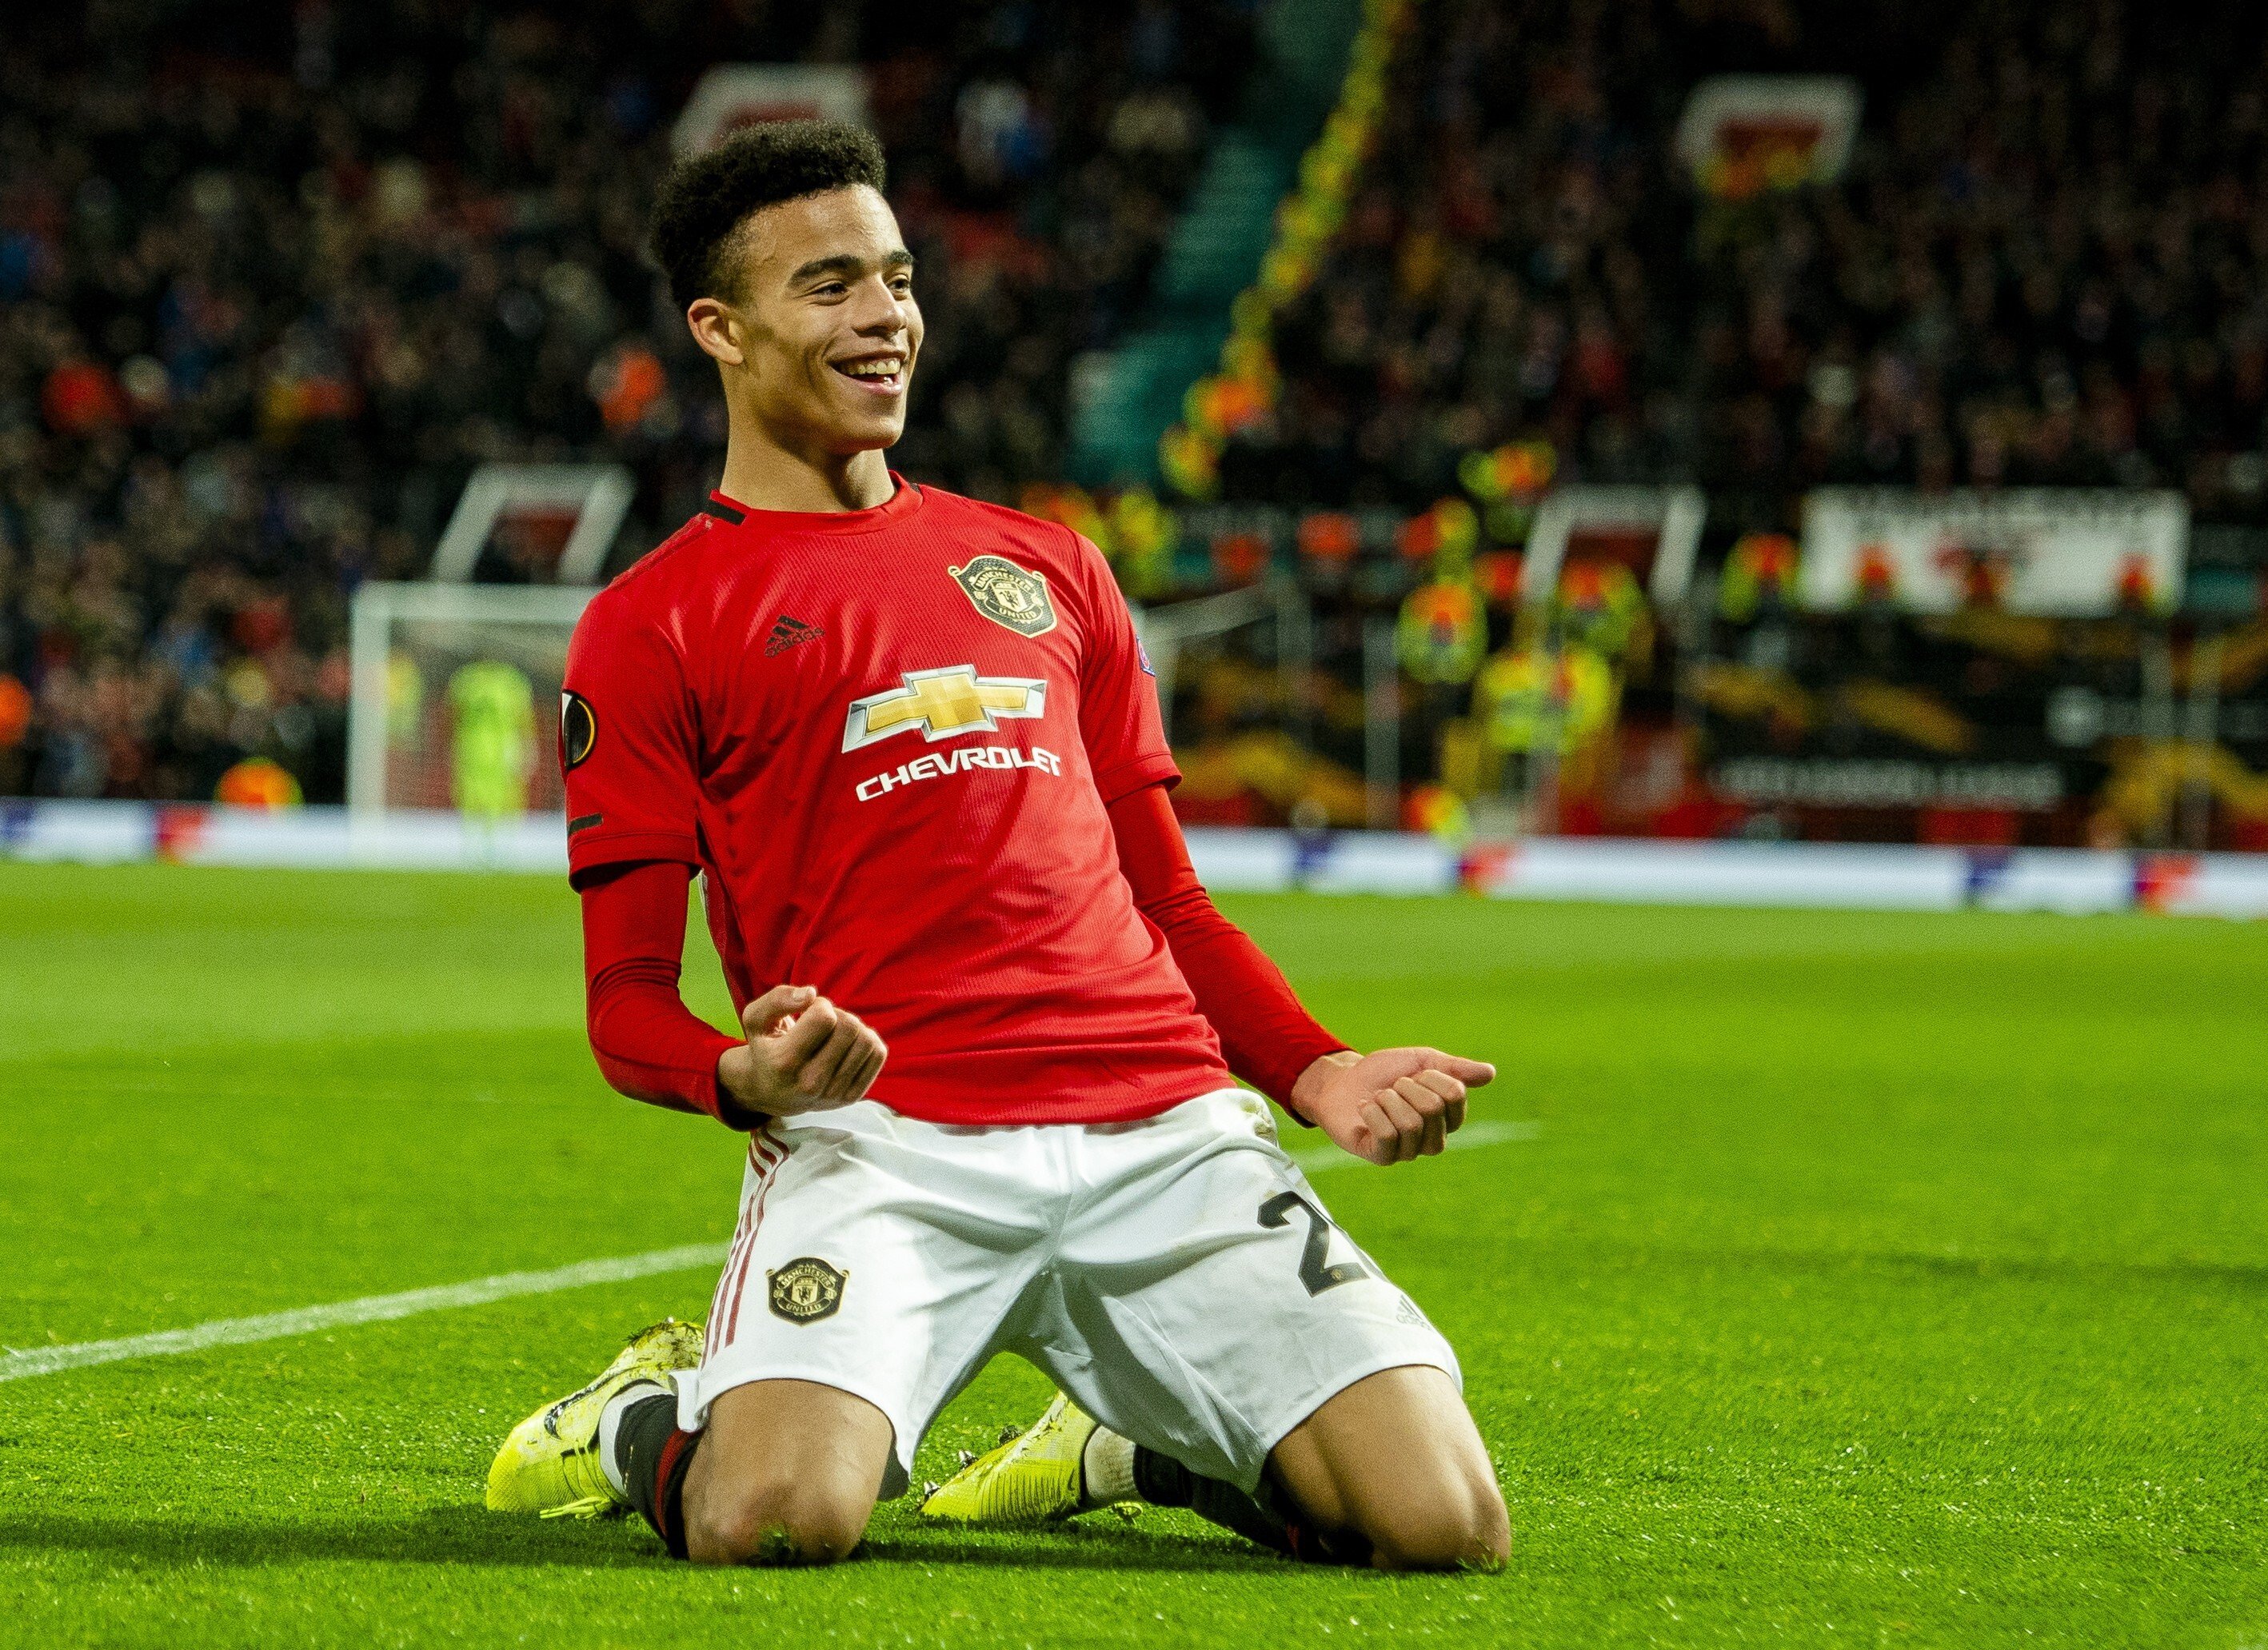 Manchester United's Mason Greenwood celebrates a goal. He has switched from forward to midfield ahead of the new Fantasy Premier League season. Photo: EPA